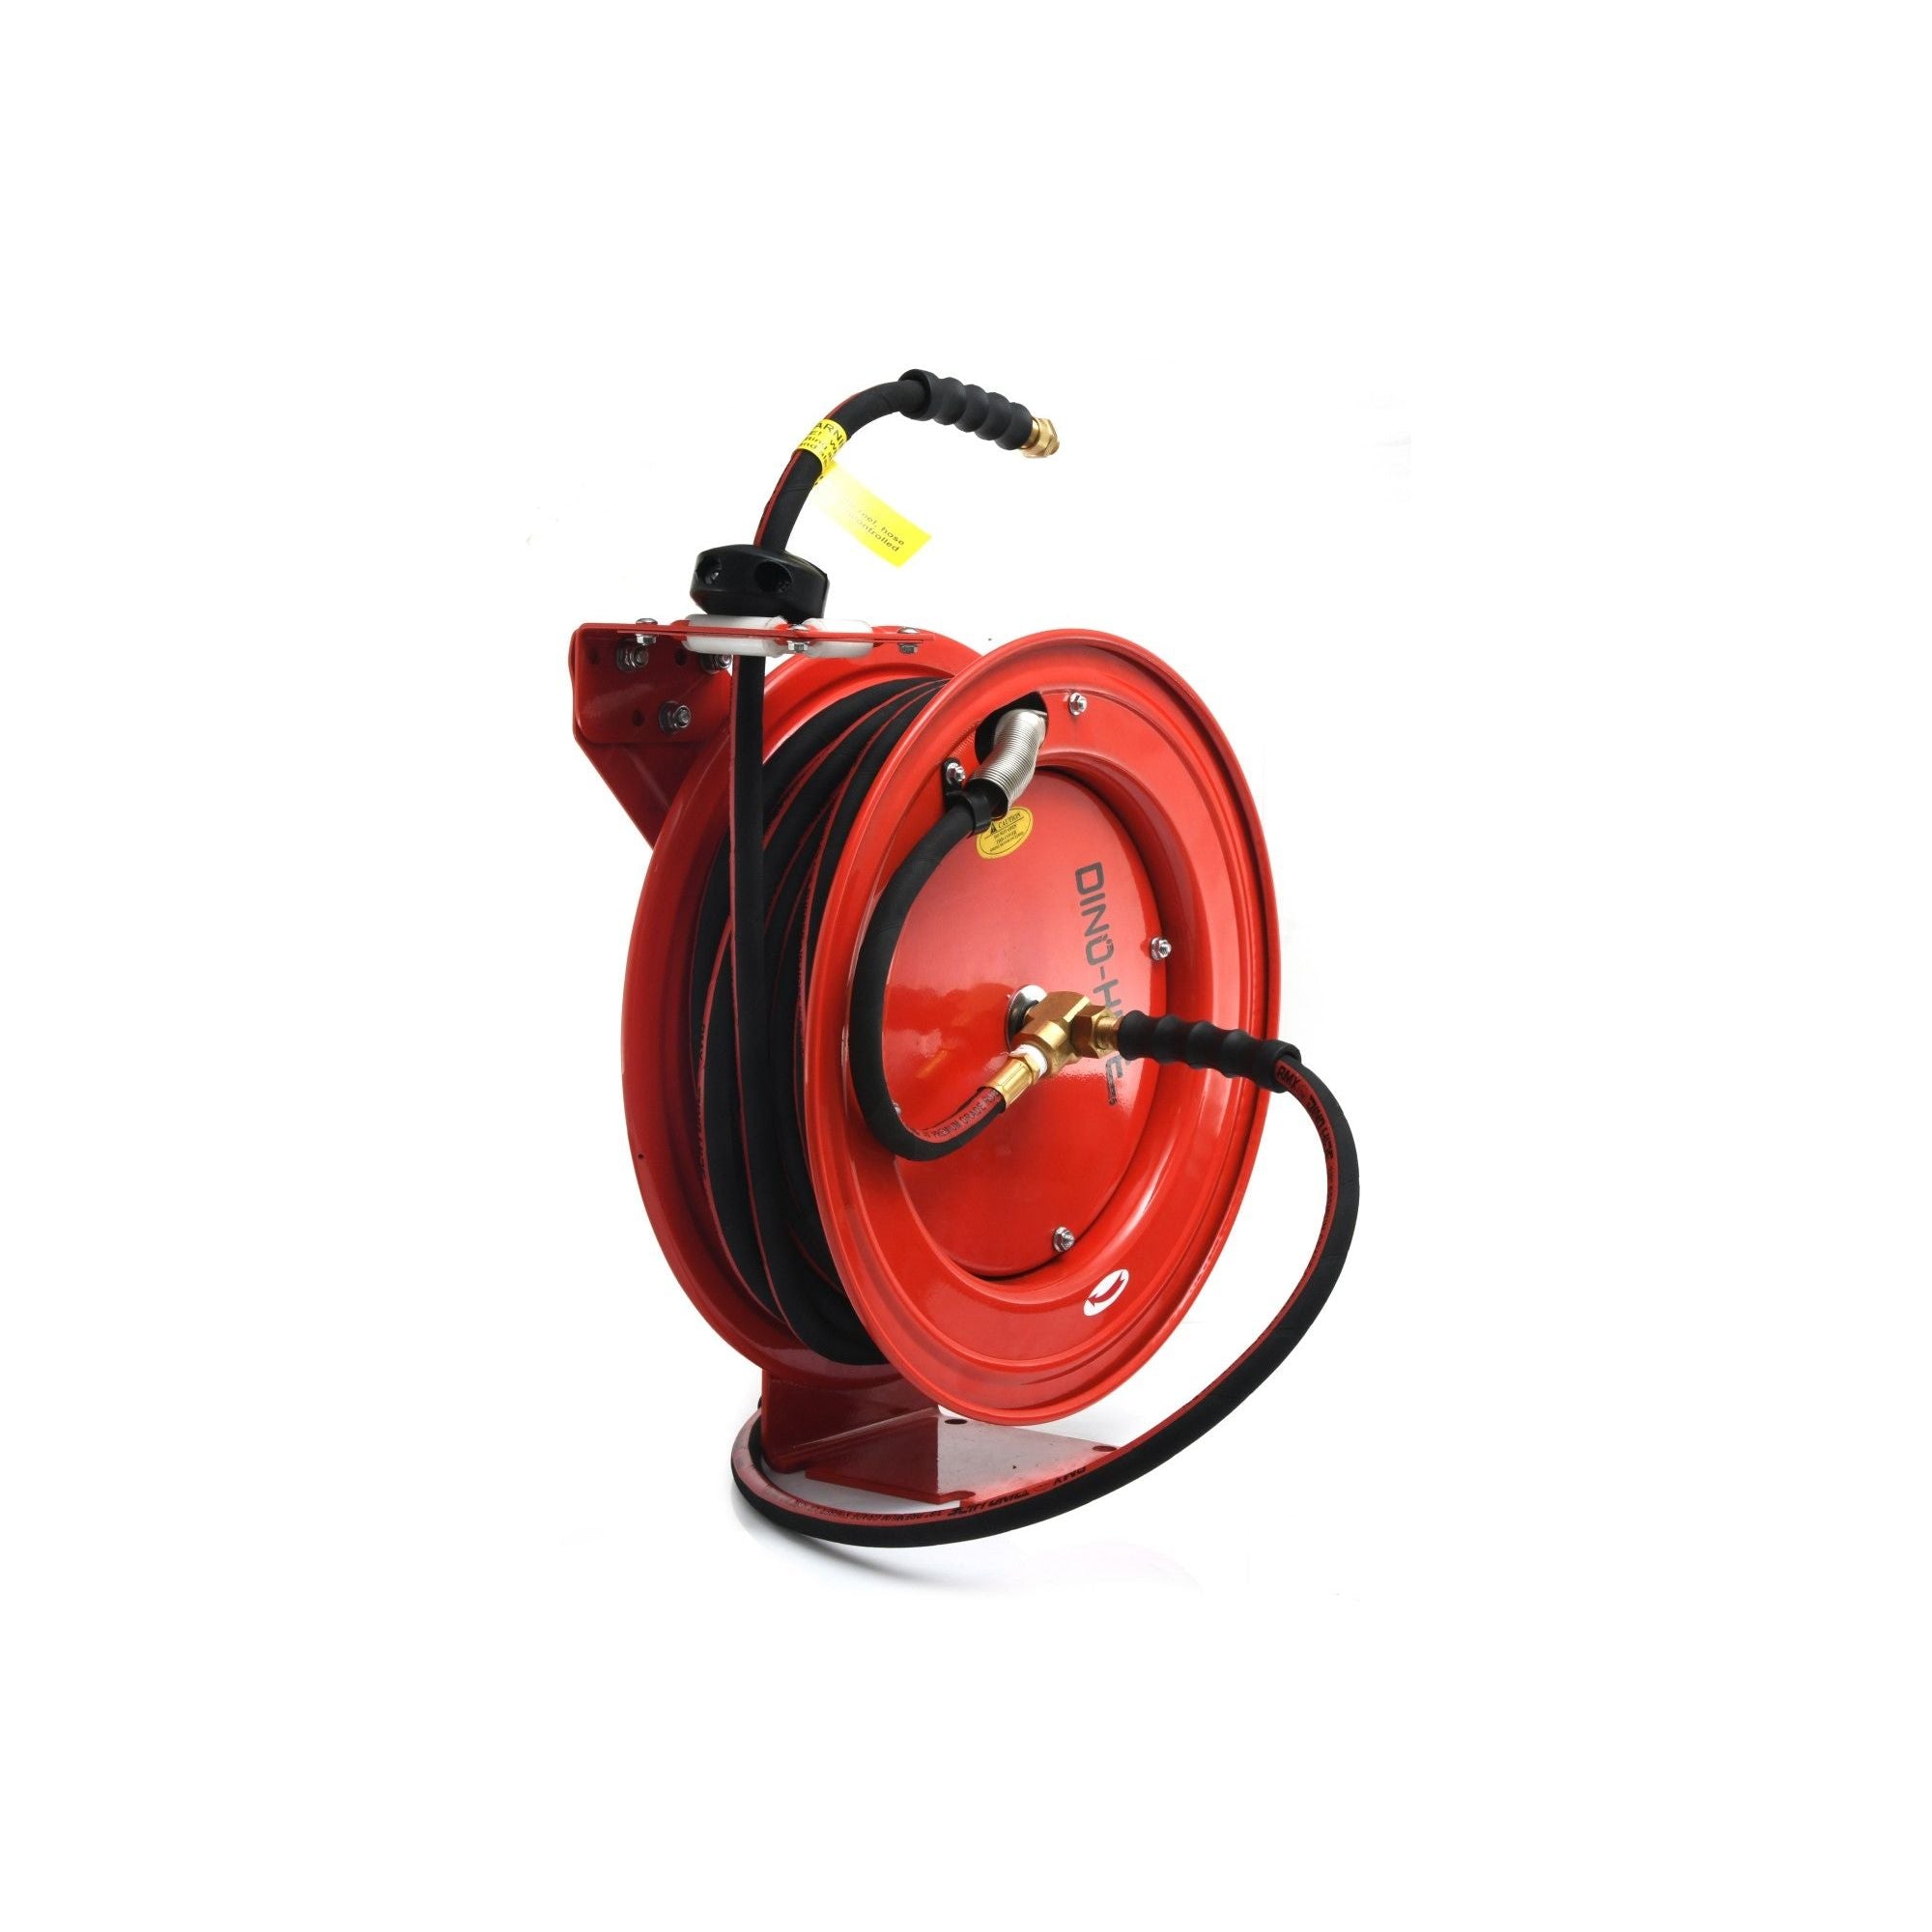 Dino-Hide Air Hose Reel 3/8" x 50' Retractable Heavy Duty Steel Construction with Wrapped Rubber Hose 300 PSI